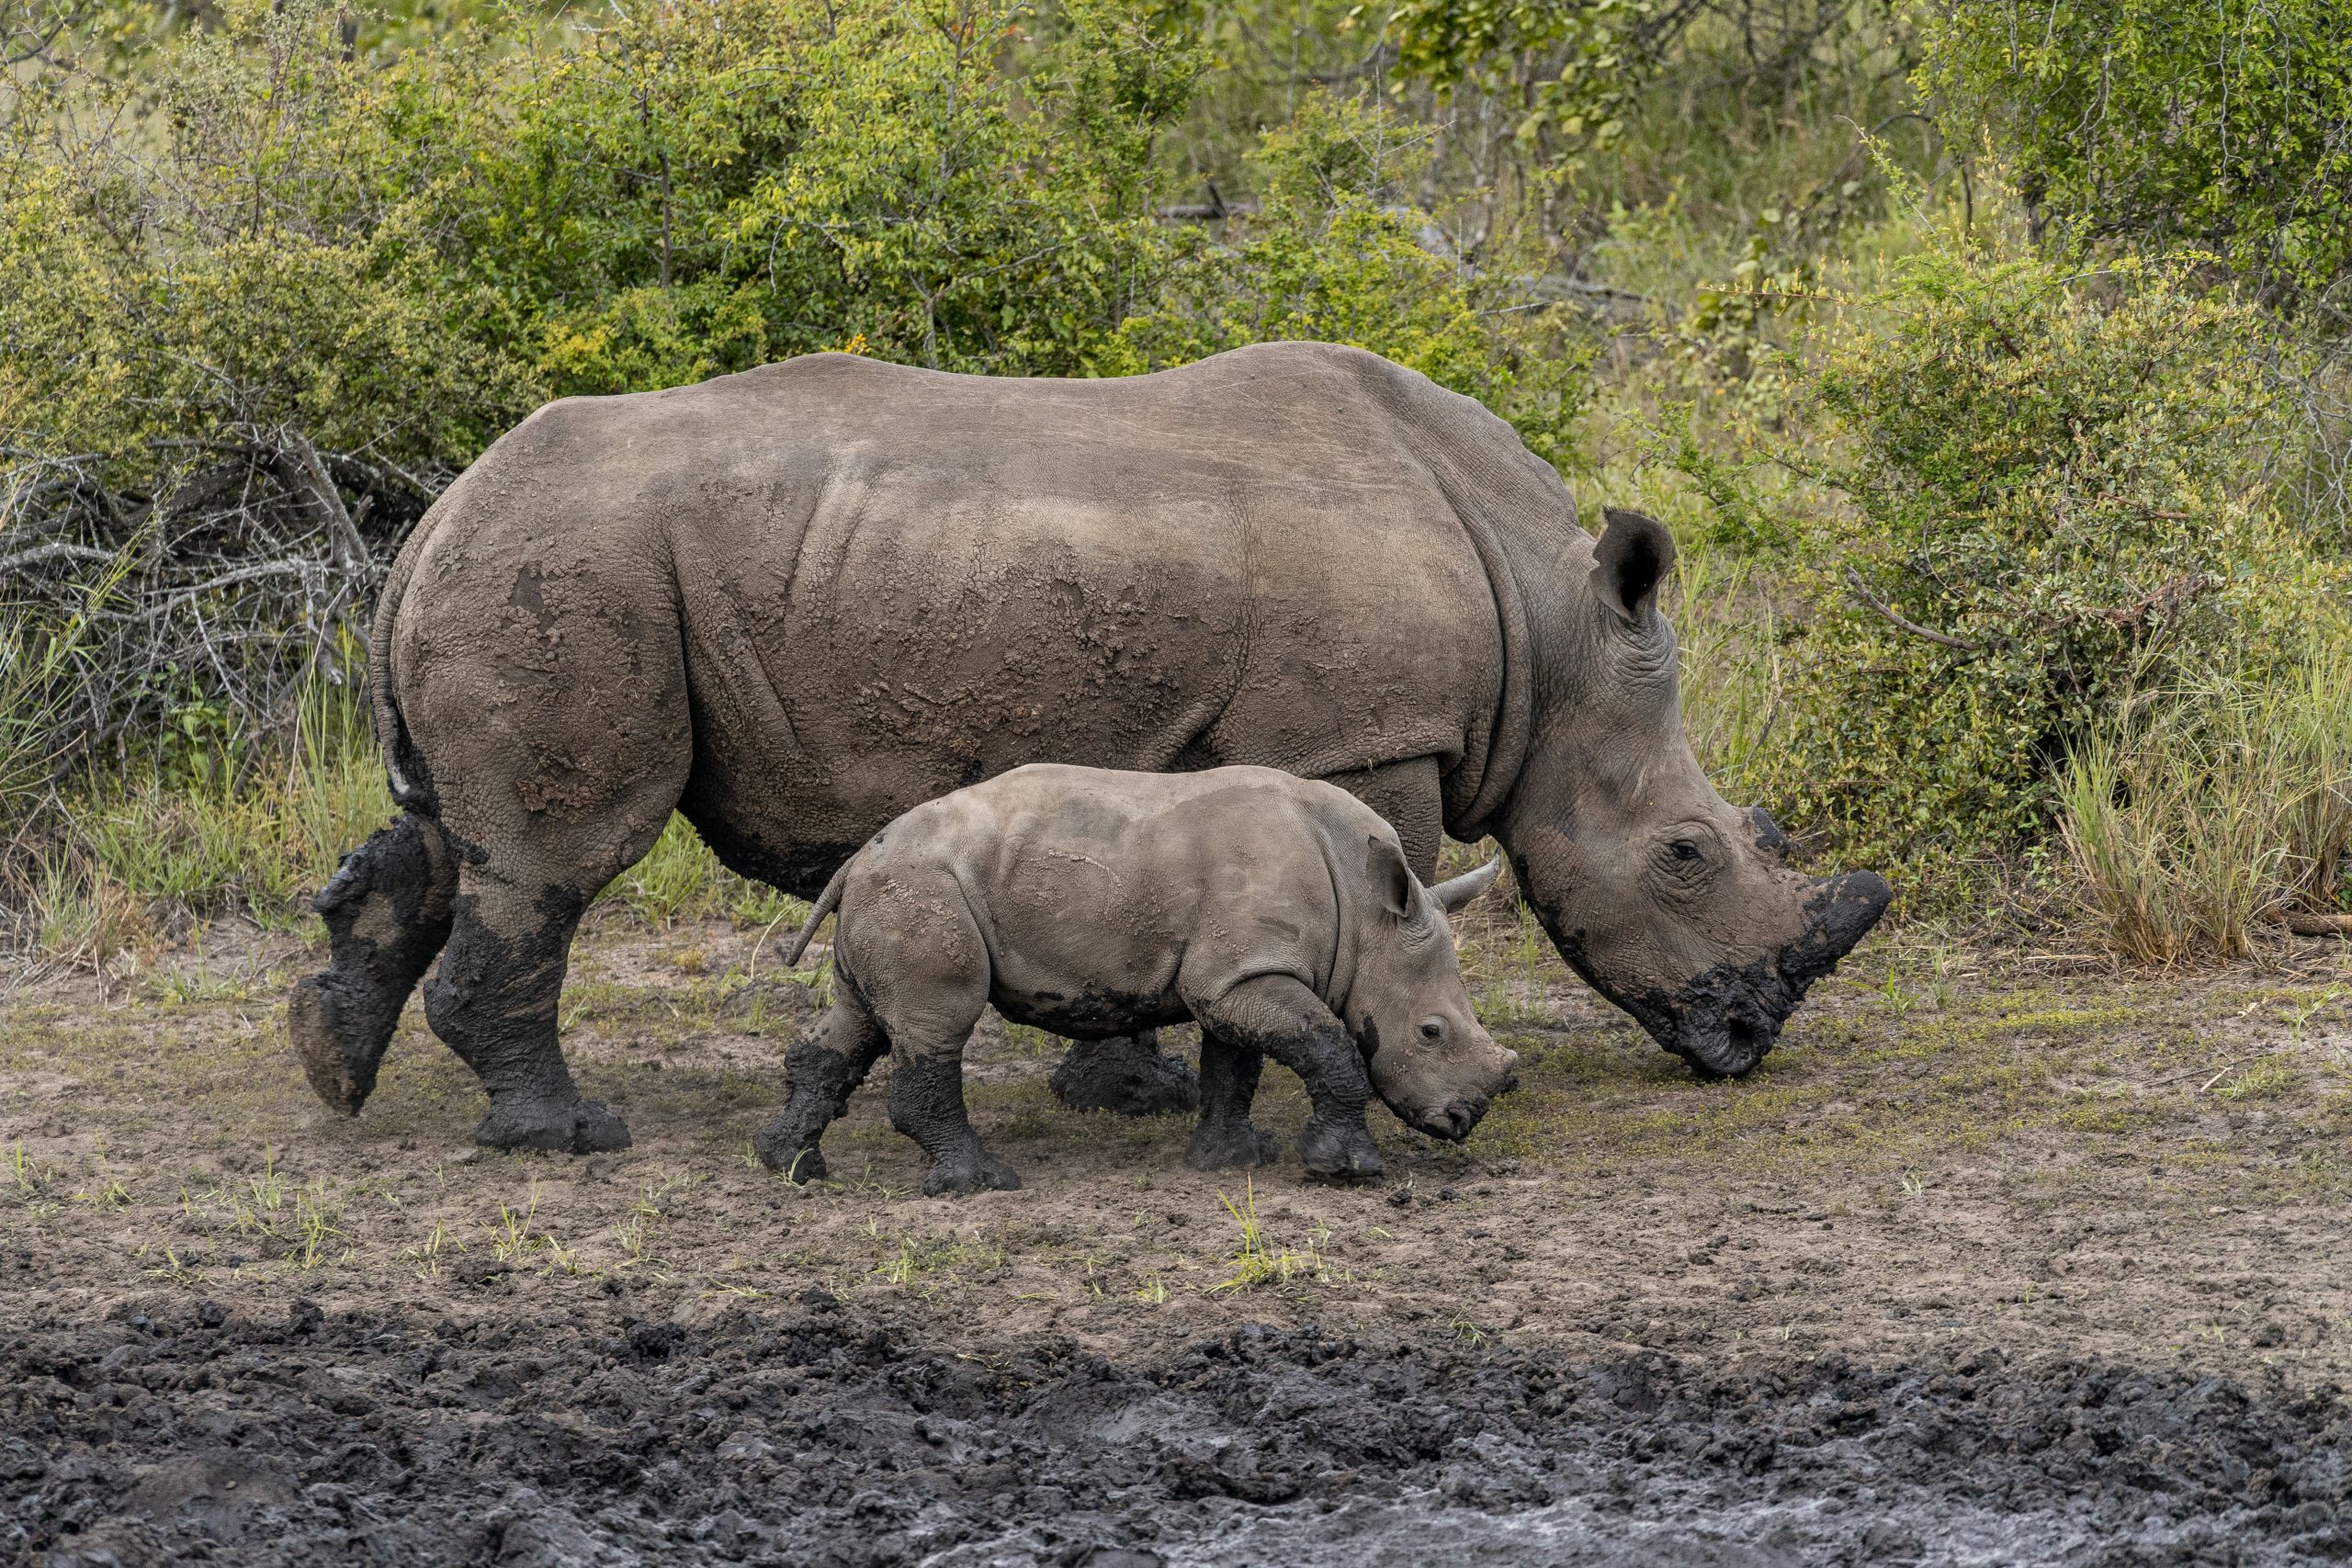 Rhino mother with infant